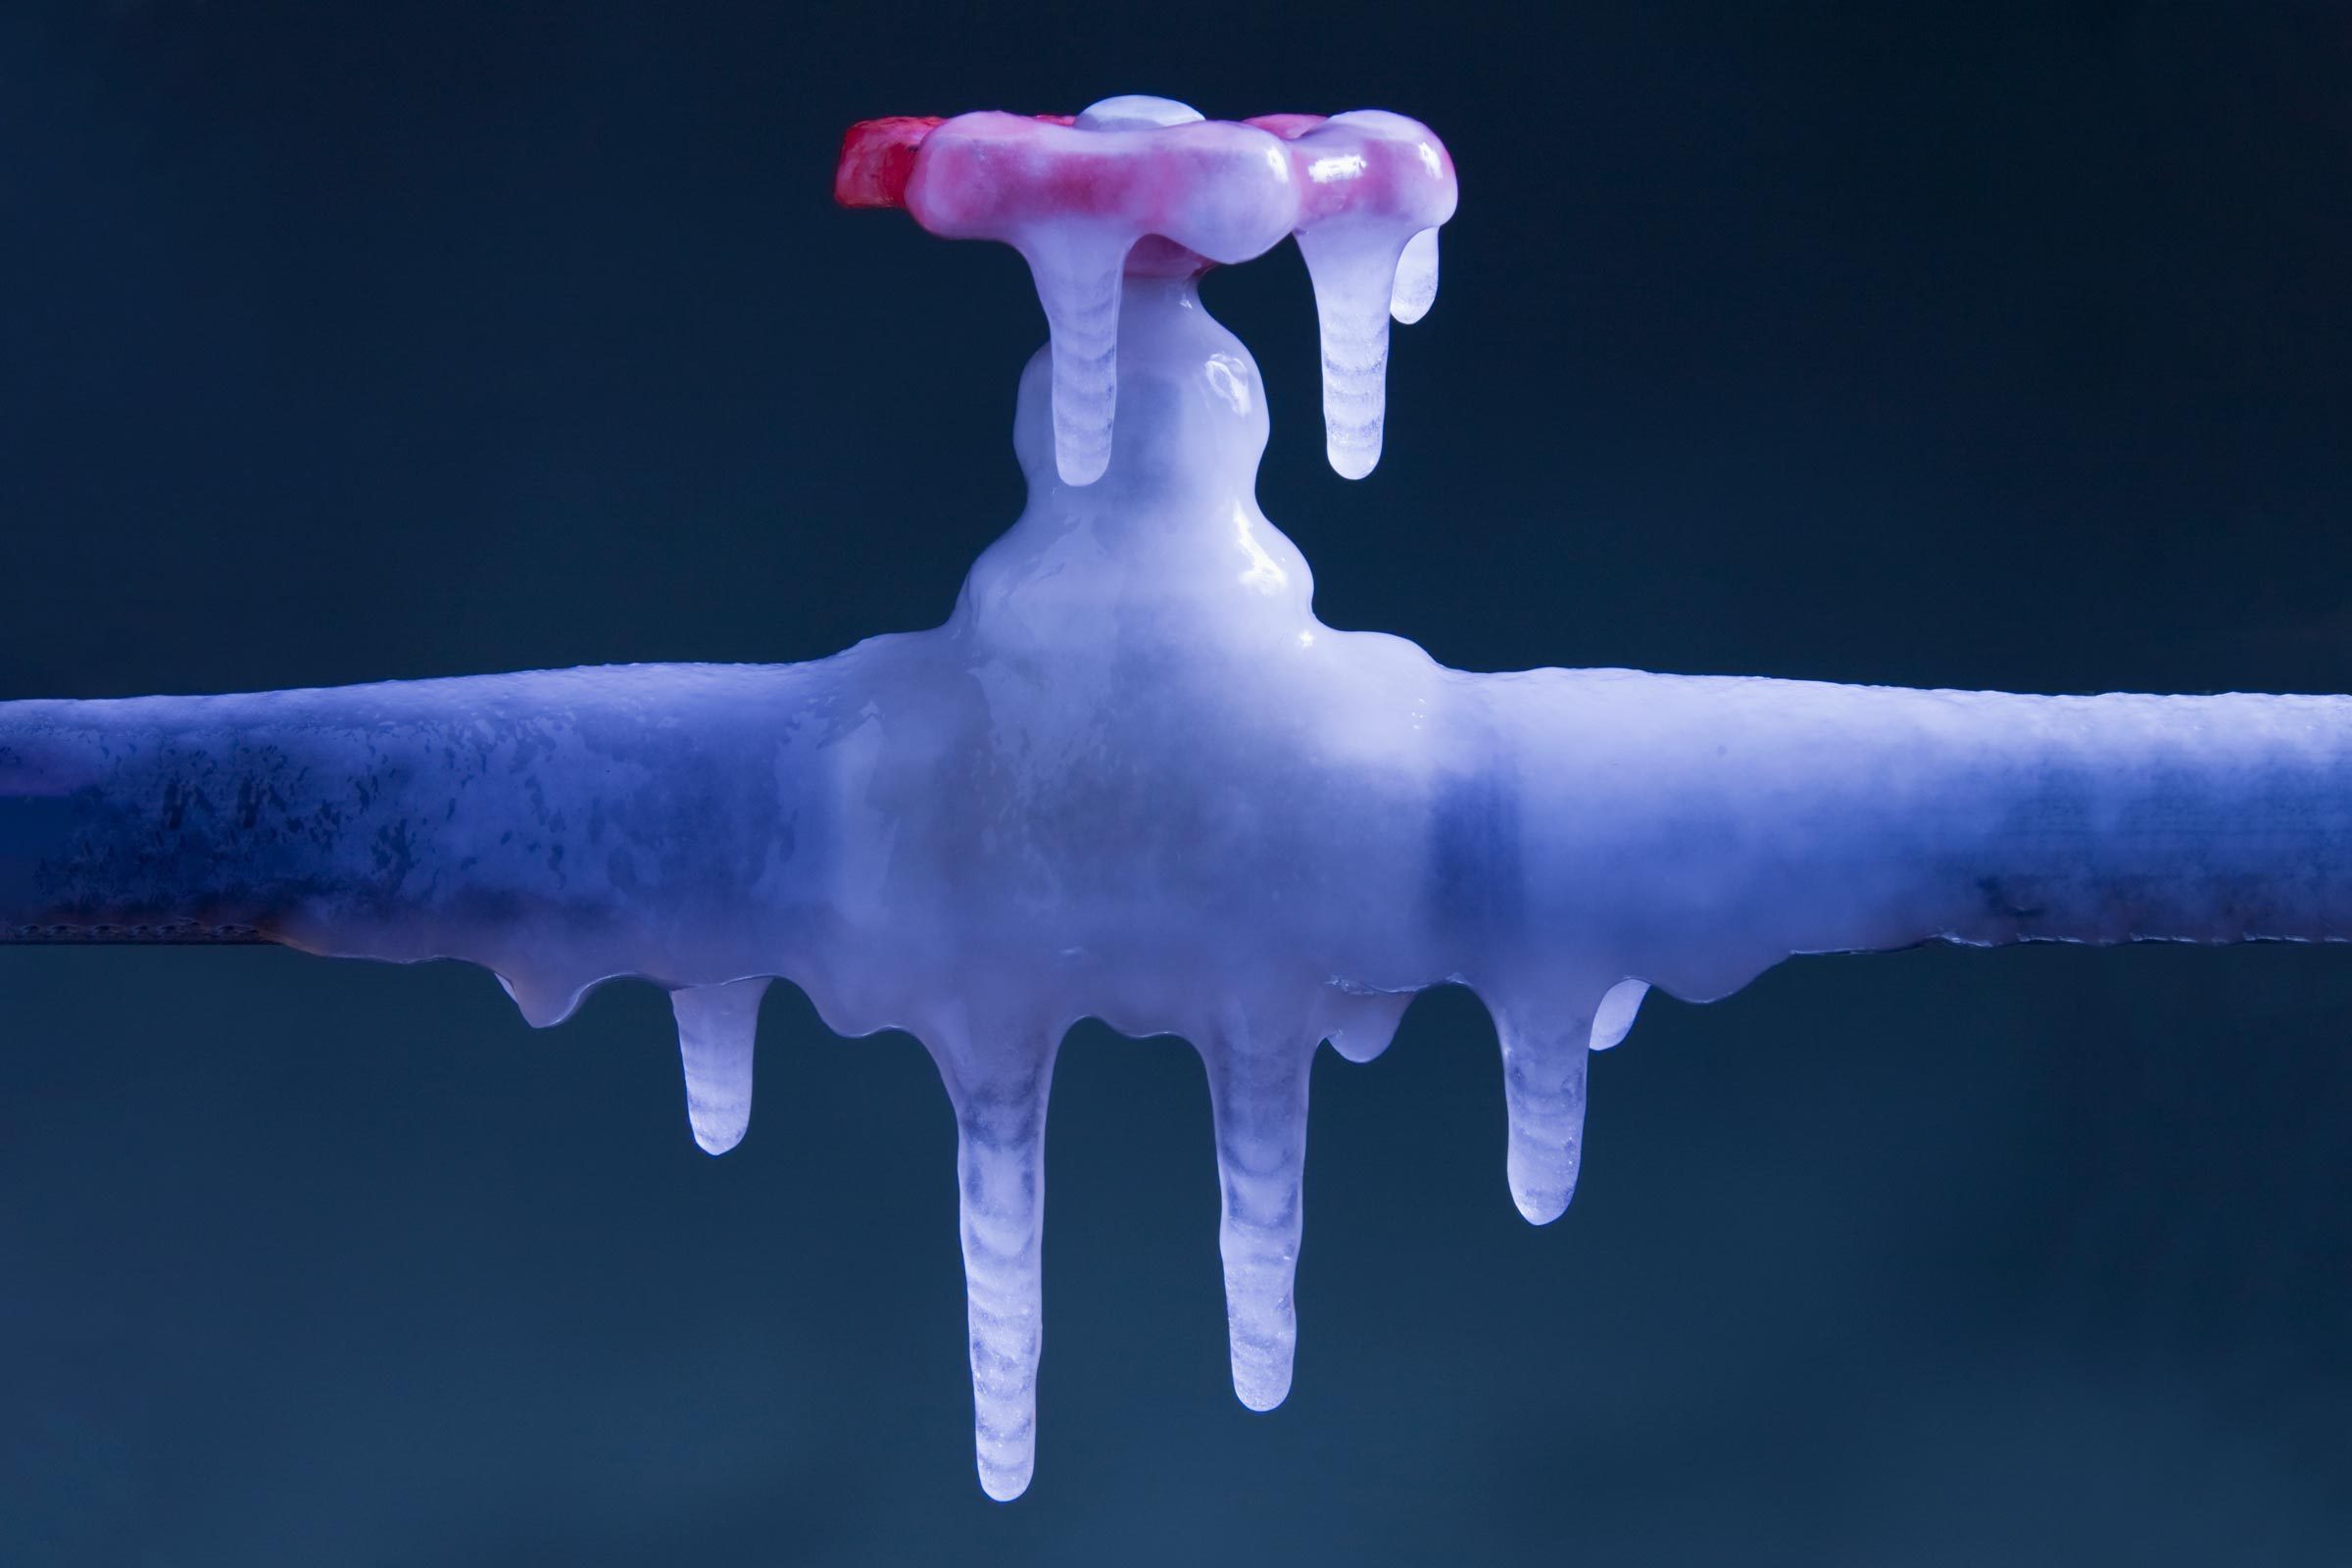 What to Do If You Have Frozen Pipes